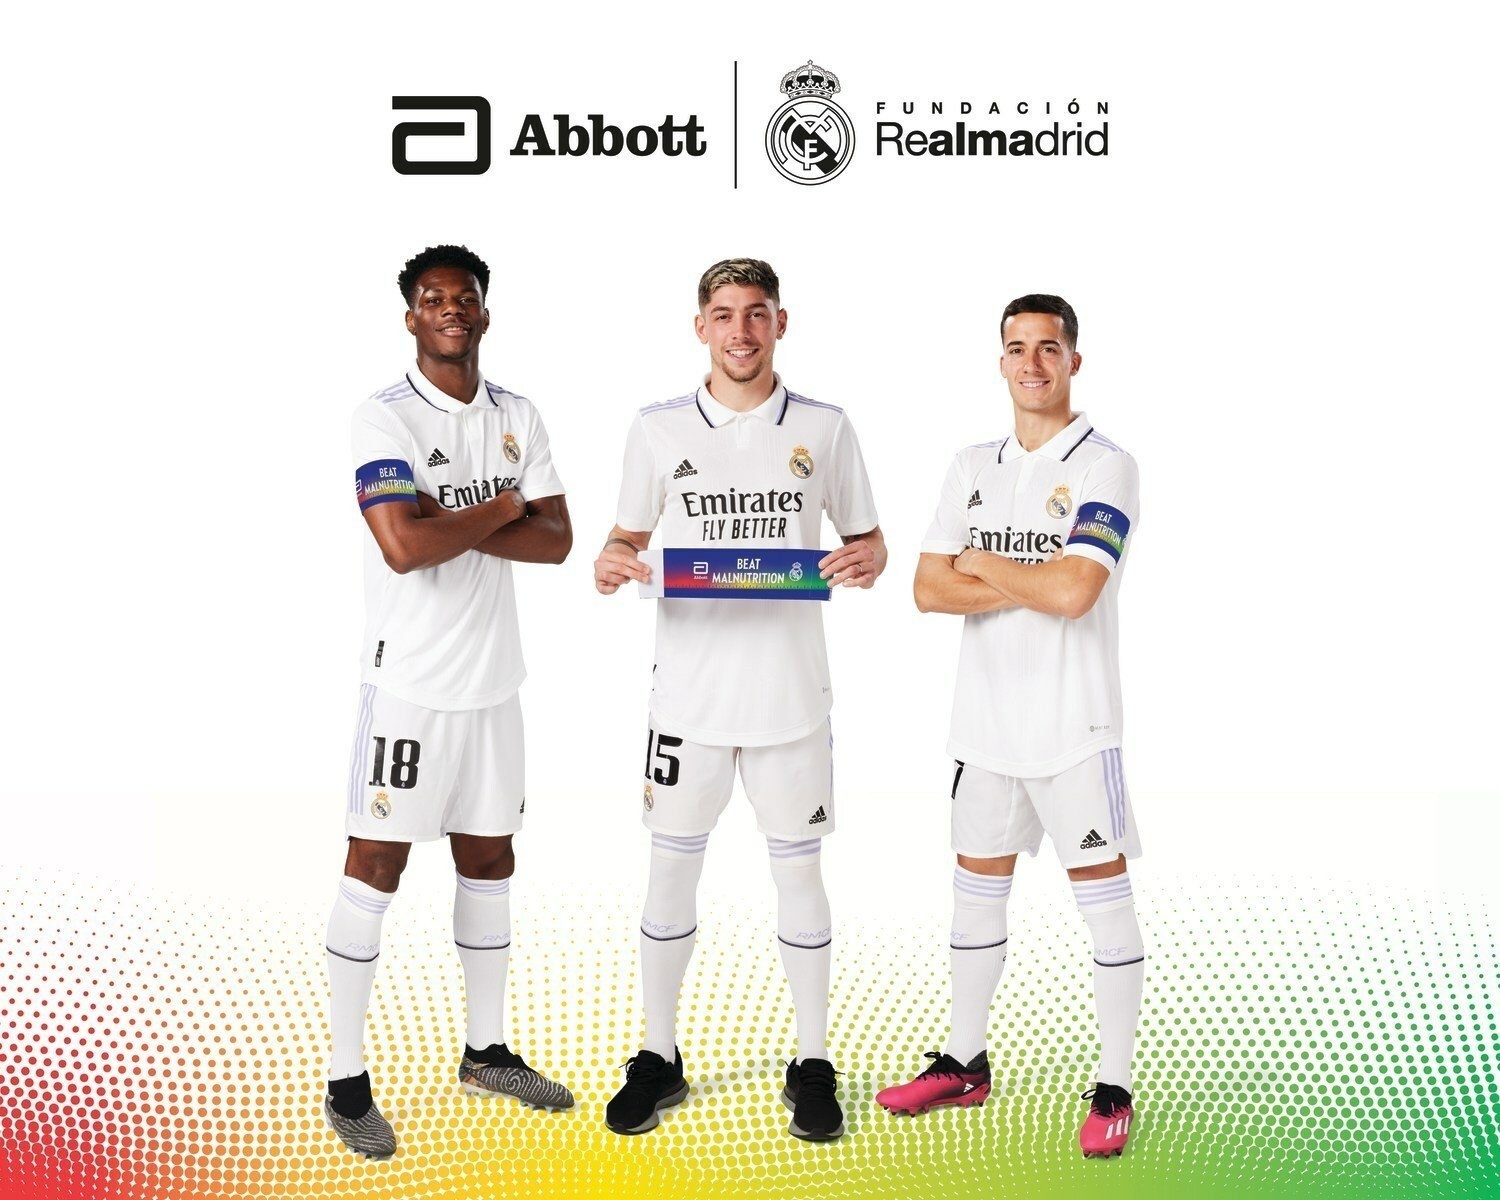 Abbott and Real Madrid team up to beat malnutrition